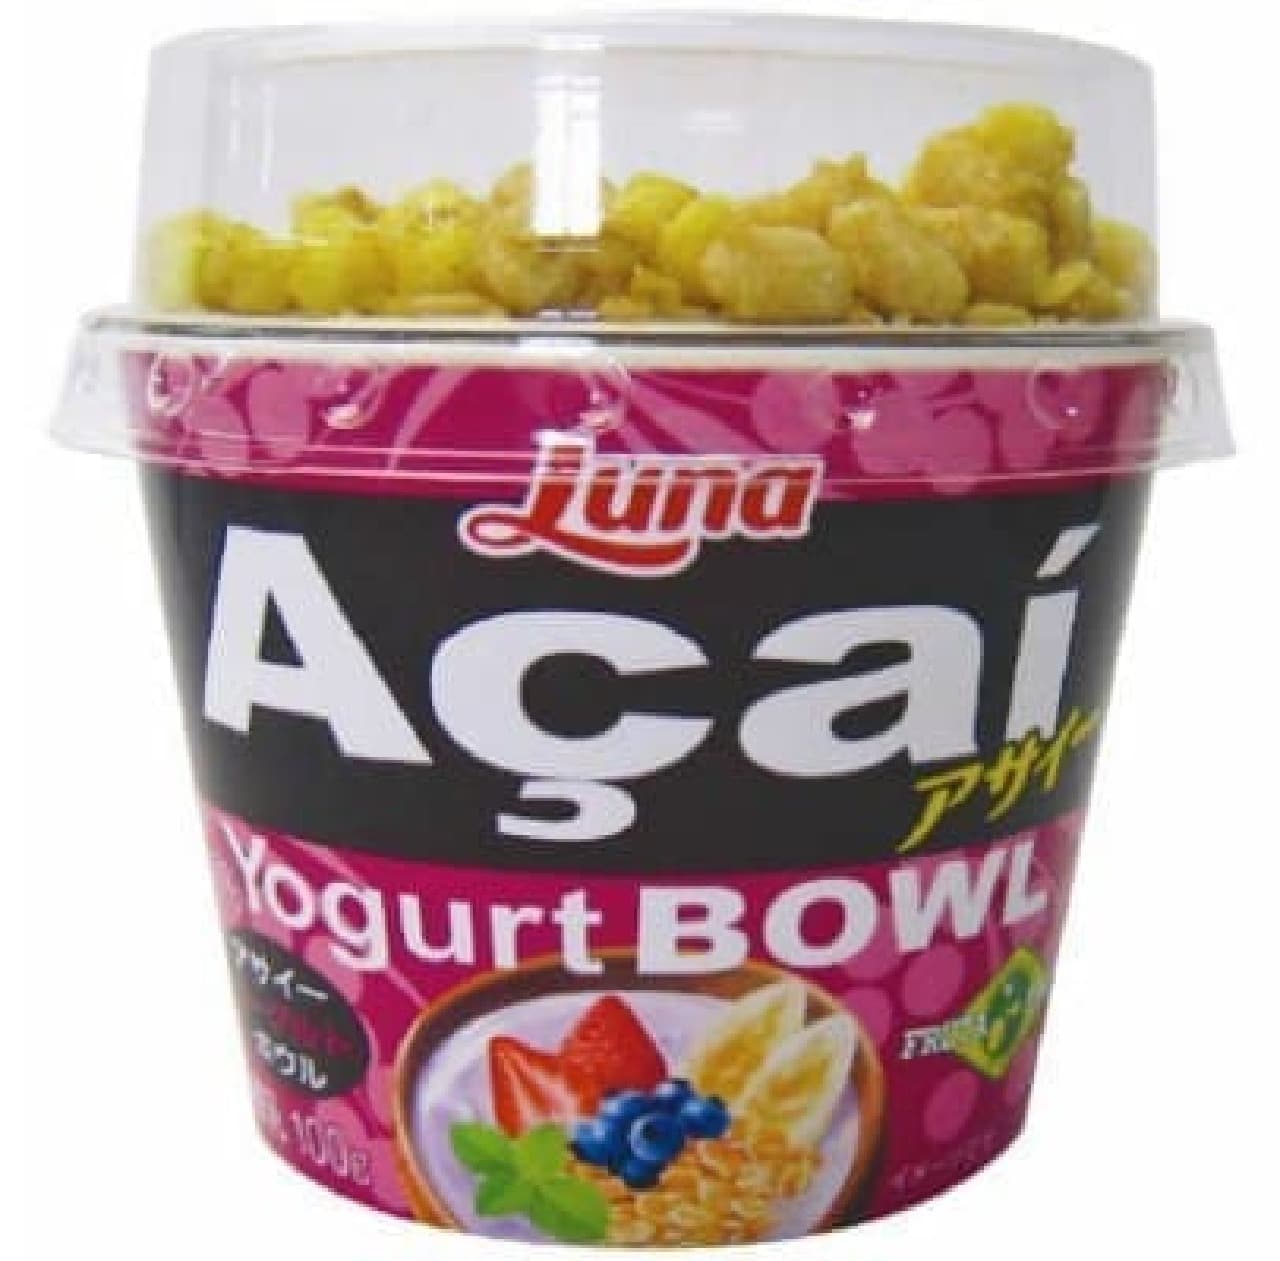 How about yogurt with acai for breakfast?